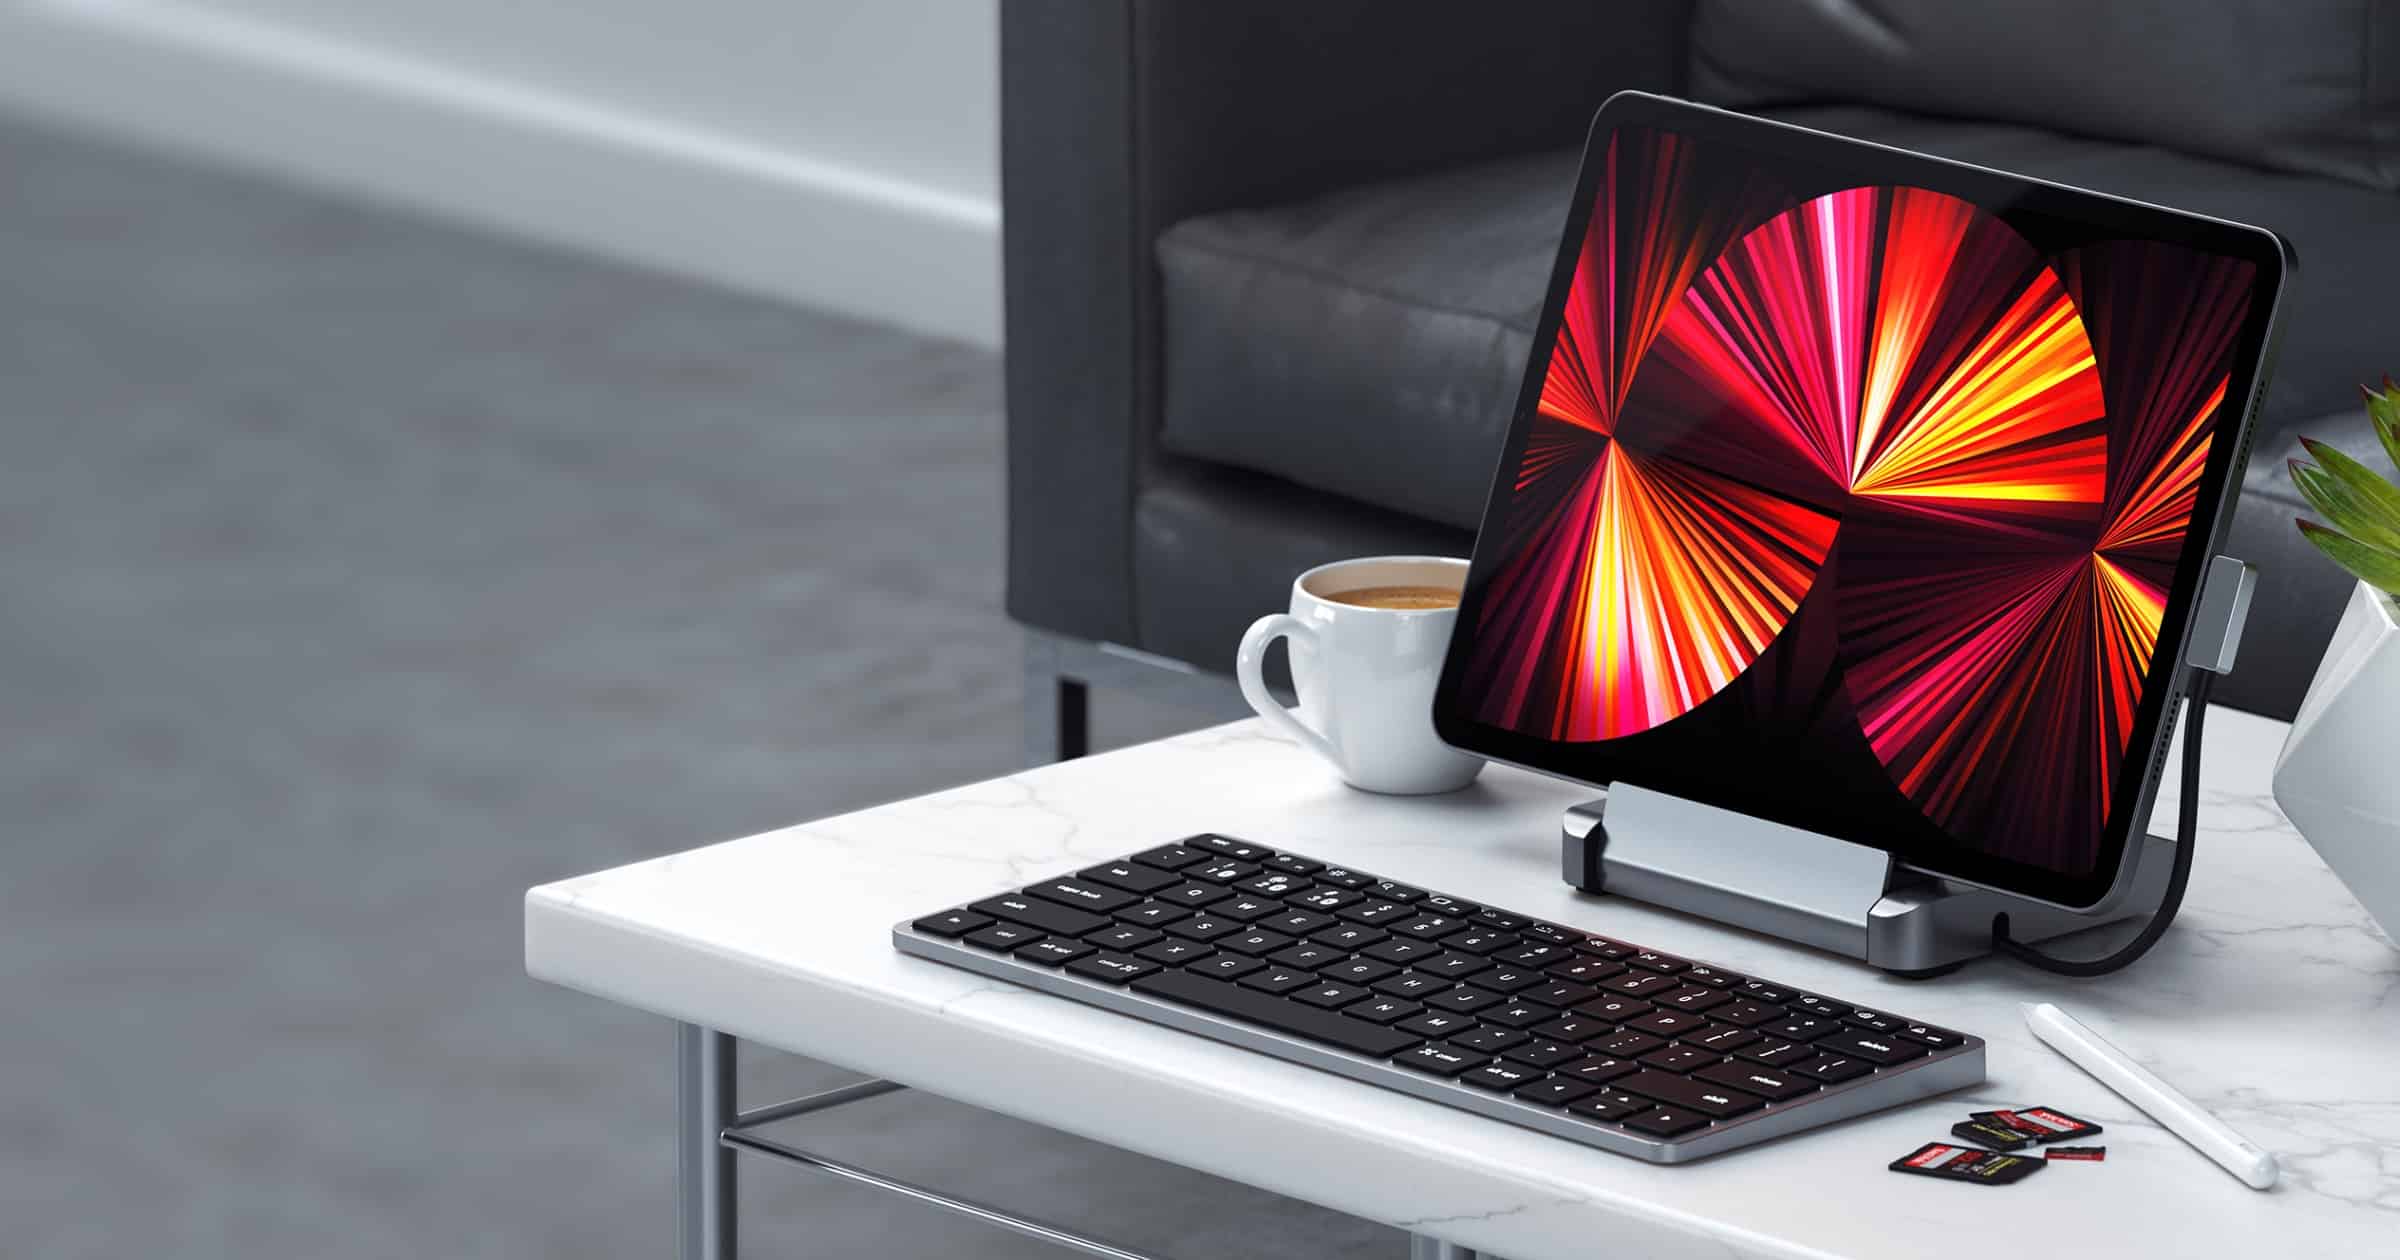 Satechi Launches iPad Pro Stand With Built-In Hub